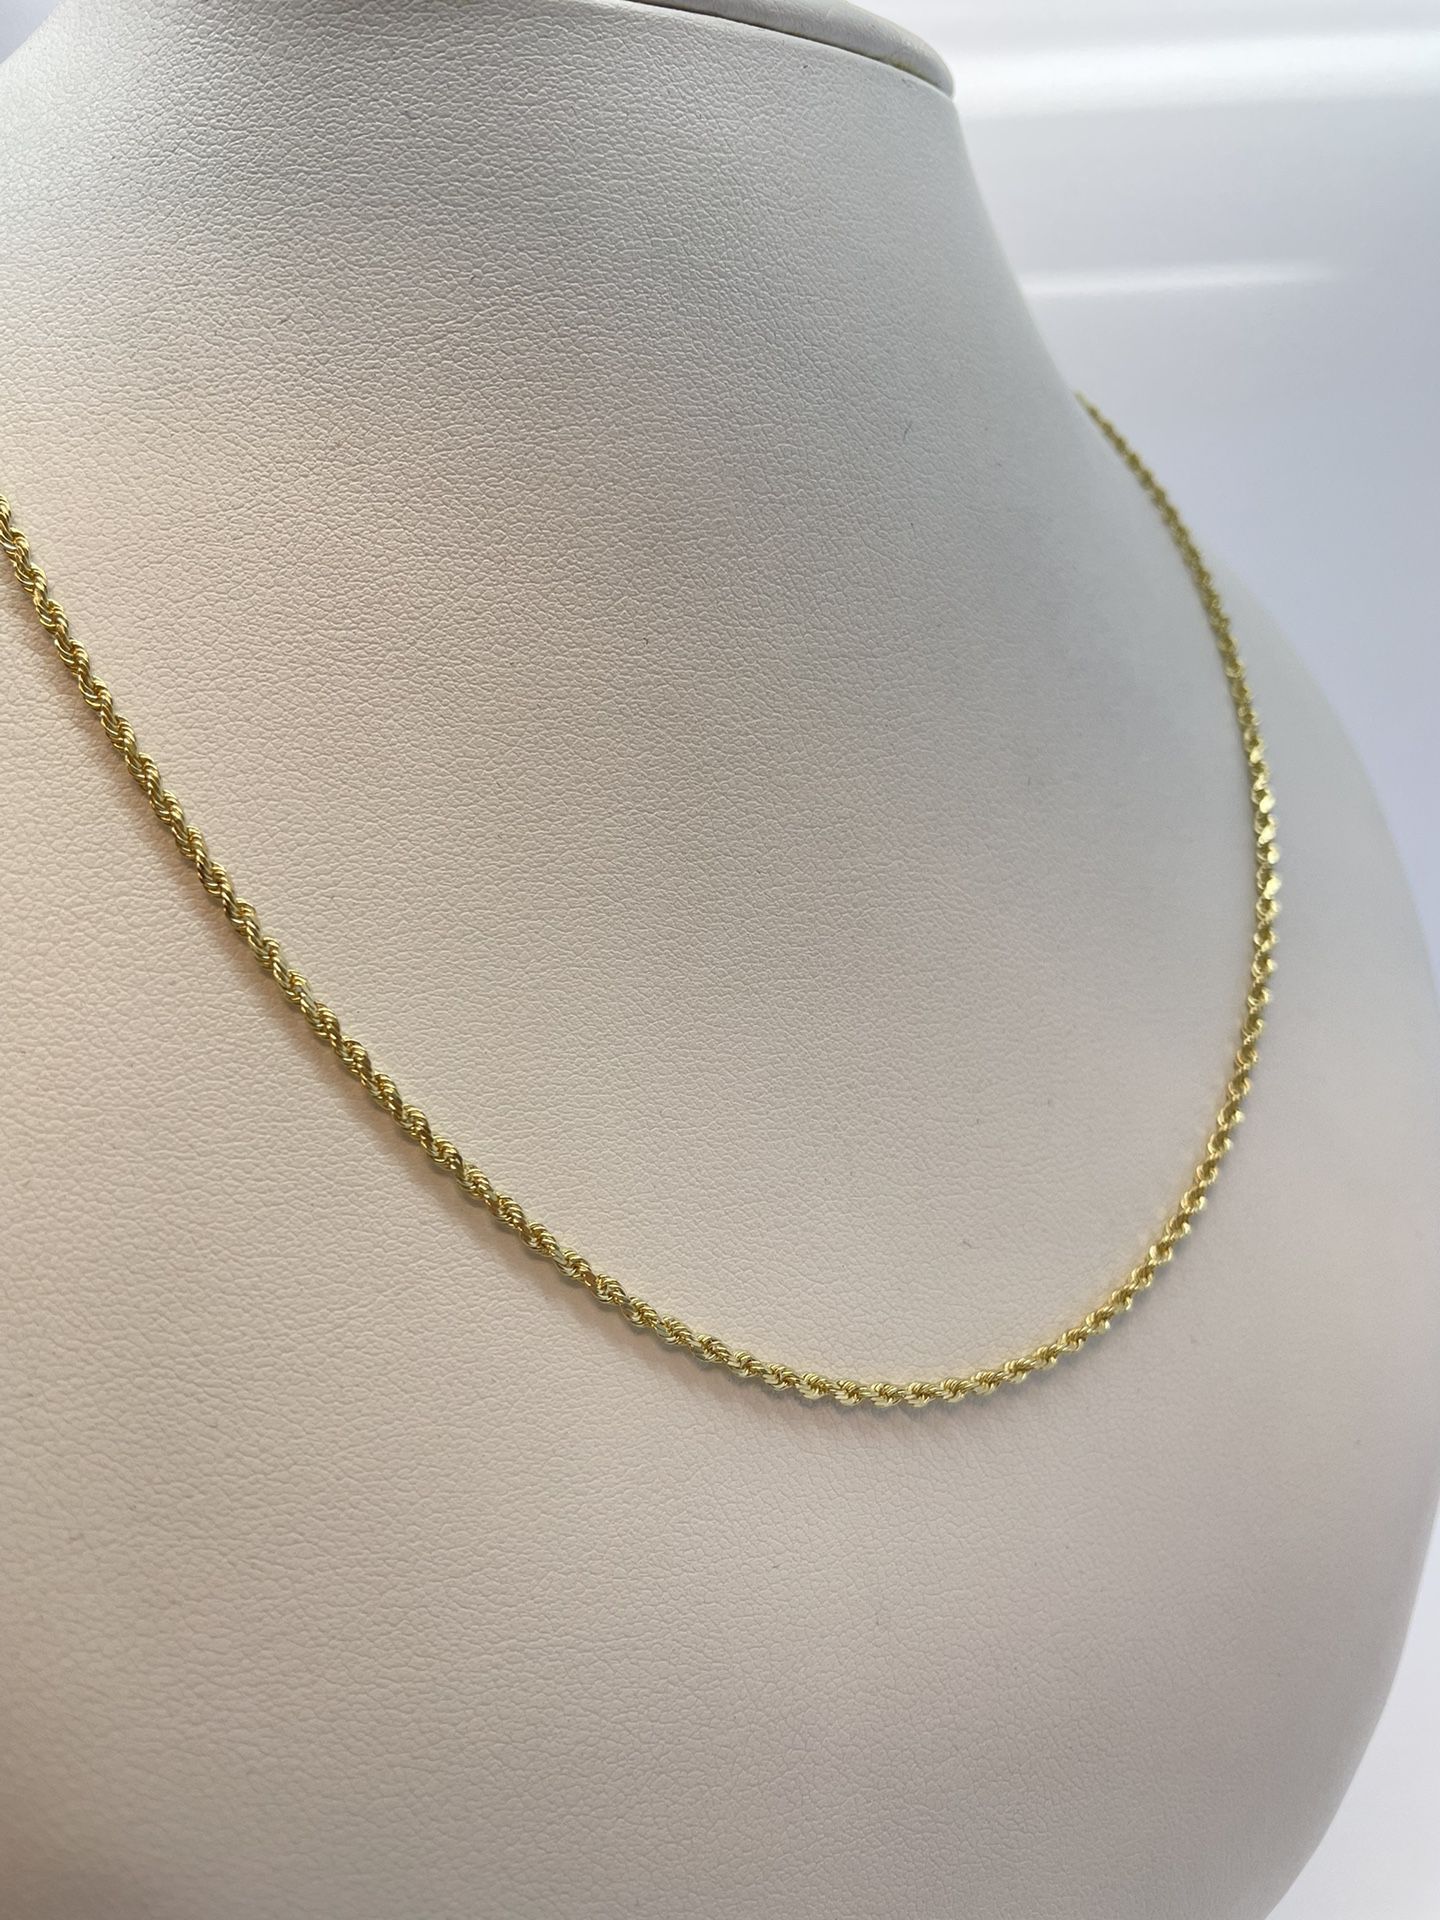 Gold Chain Rope 14K Solid Gold New 